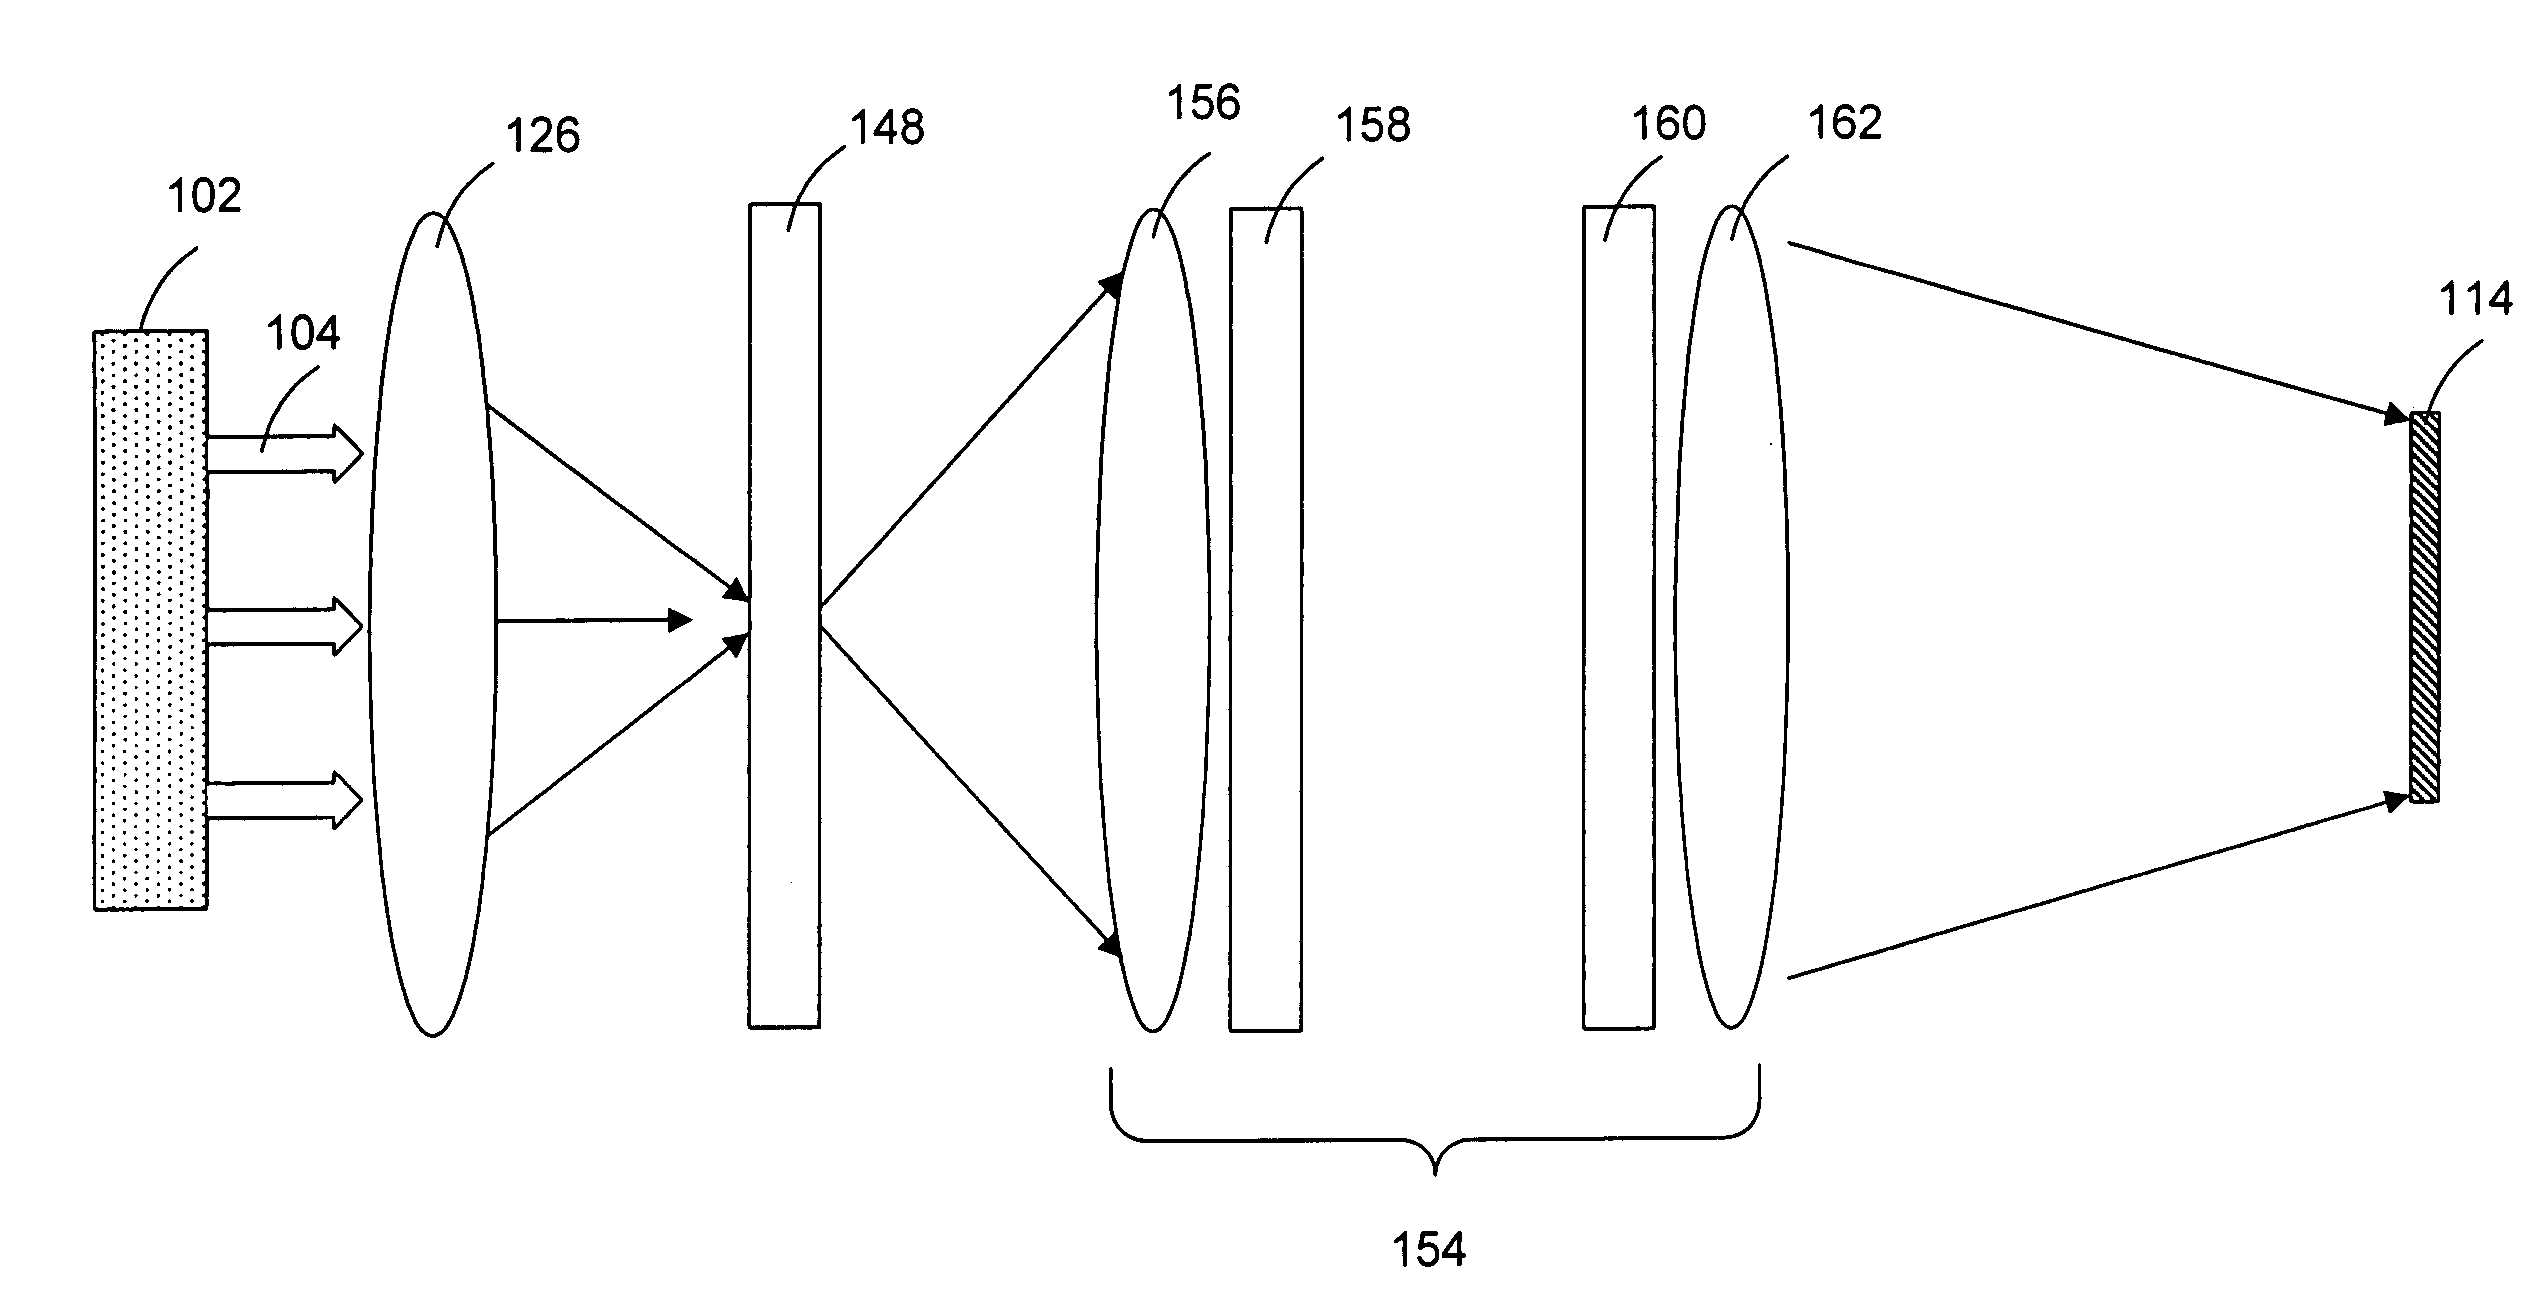 Display systems with spatial light modulators